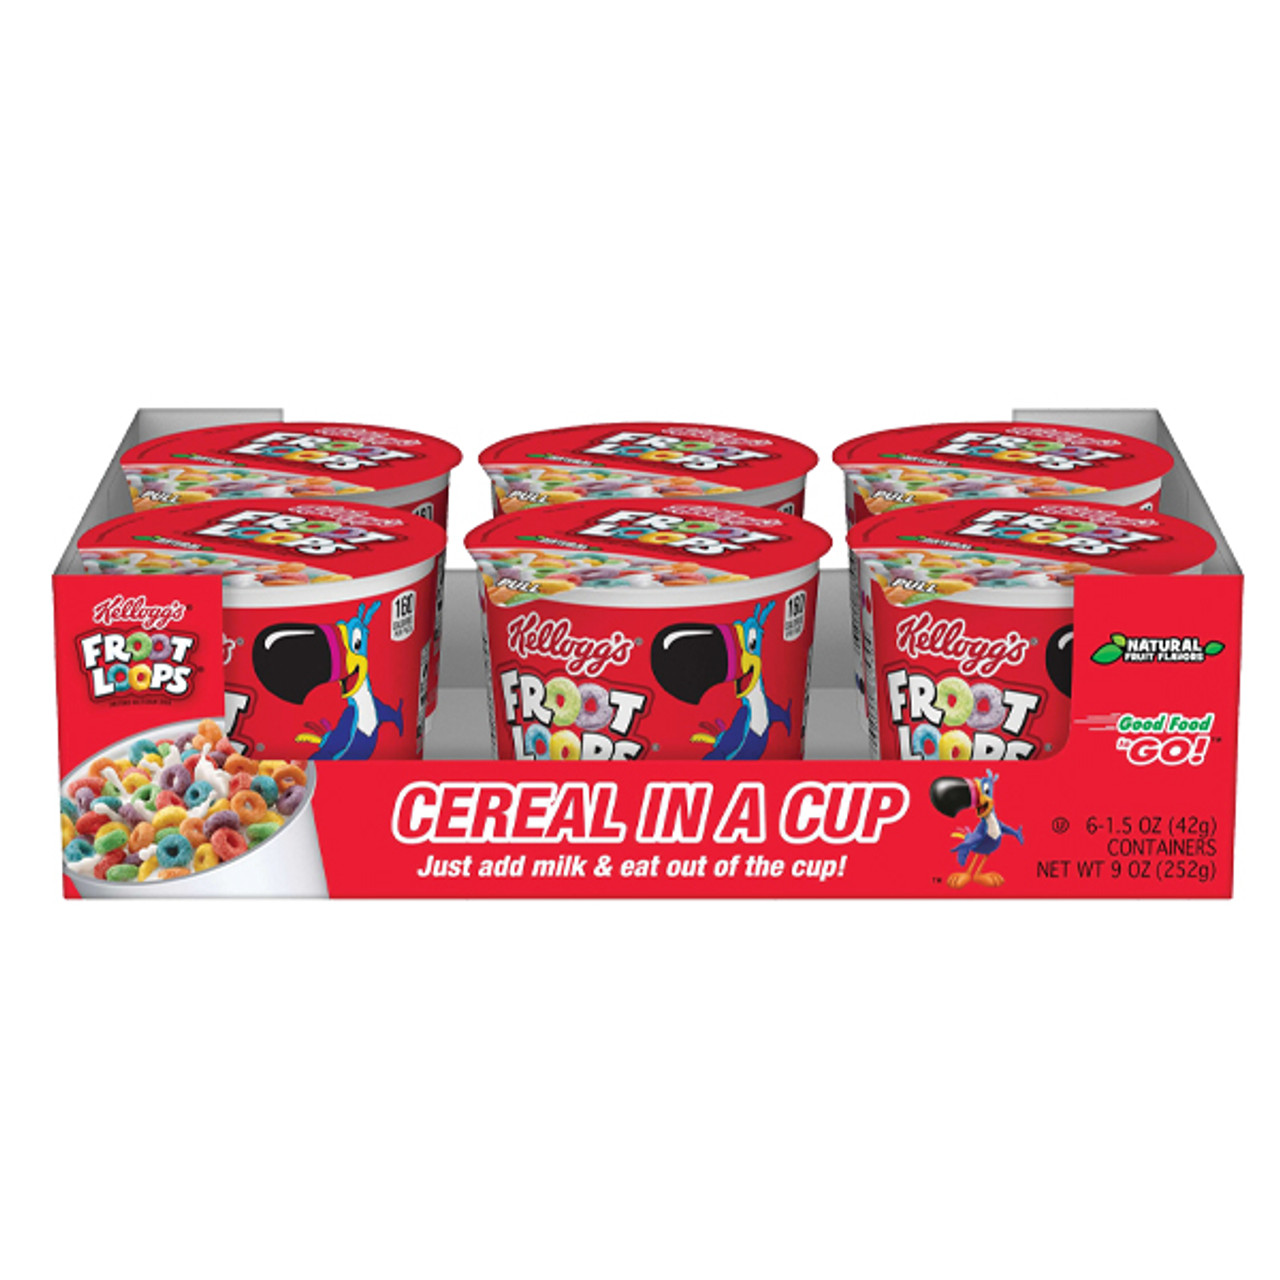 Kellogg's Froot Loops Breakfast Cereal, Single-Serve - 6 pack, 1.5 oz cups